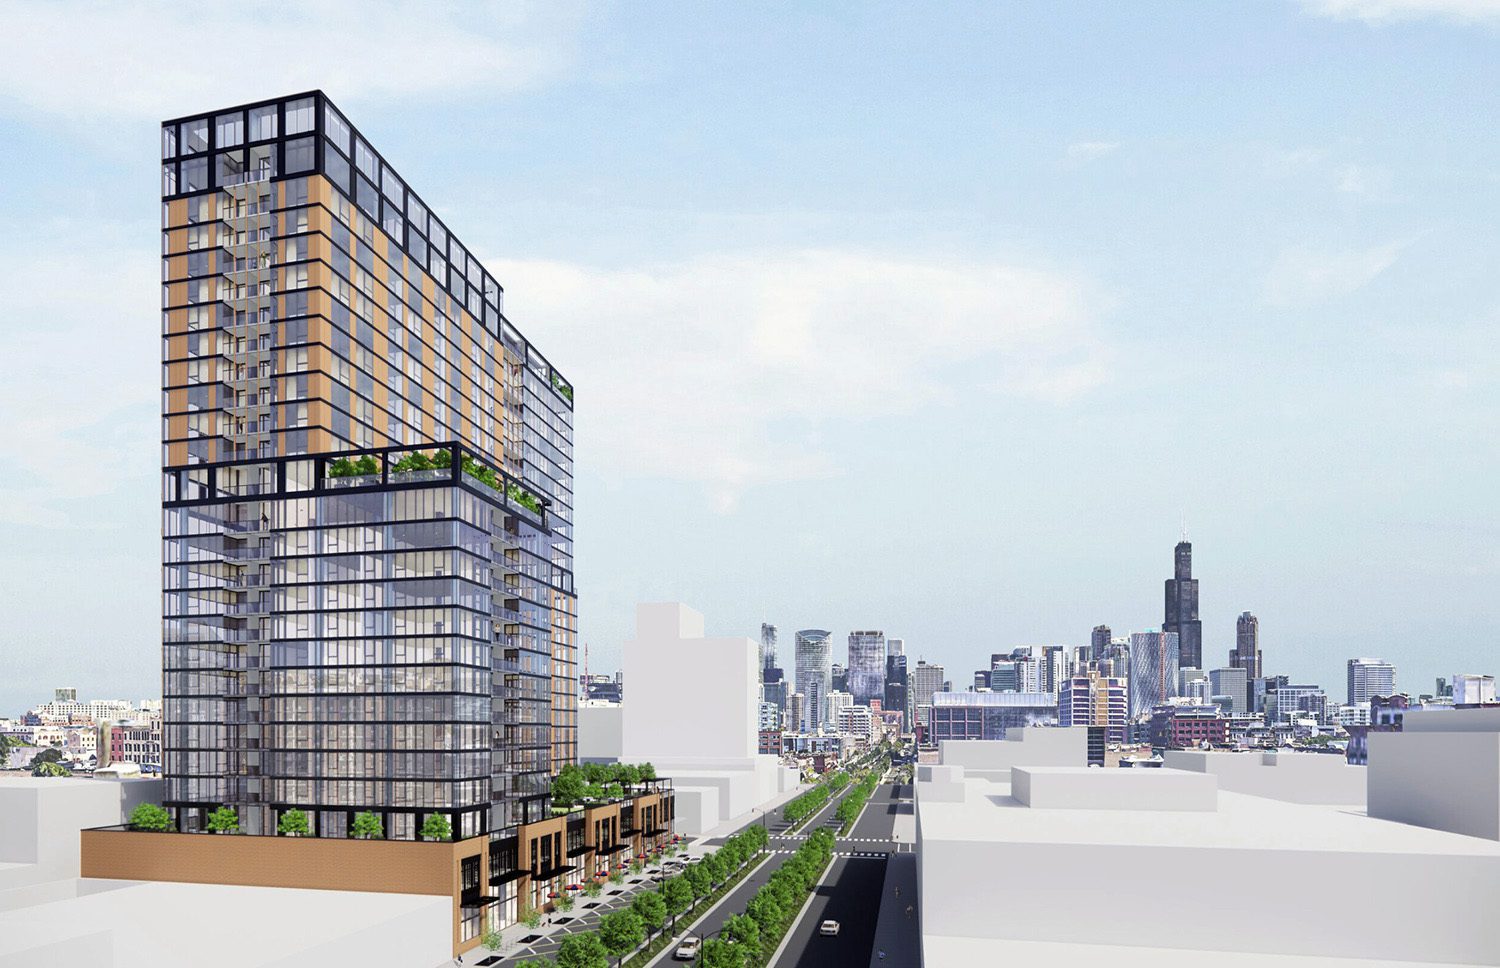 Rendering of new apartment in Chicago showing green trees along street and glass outside of building.